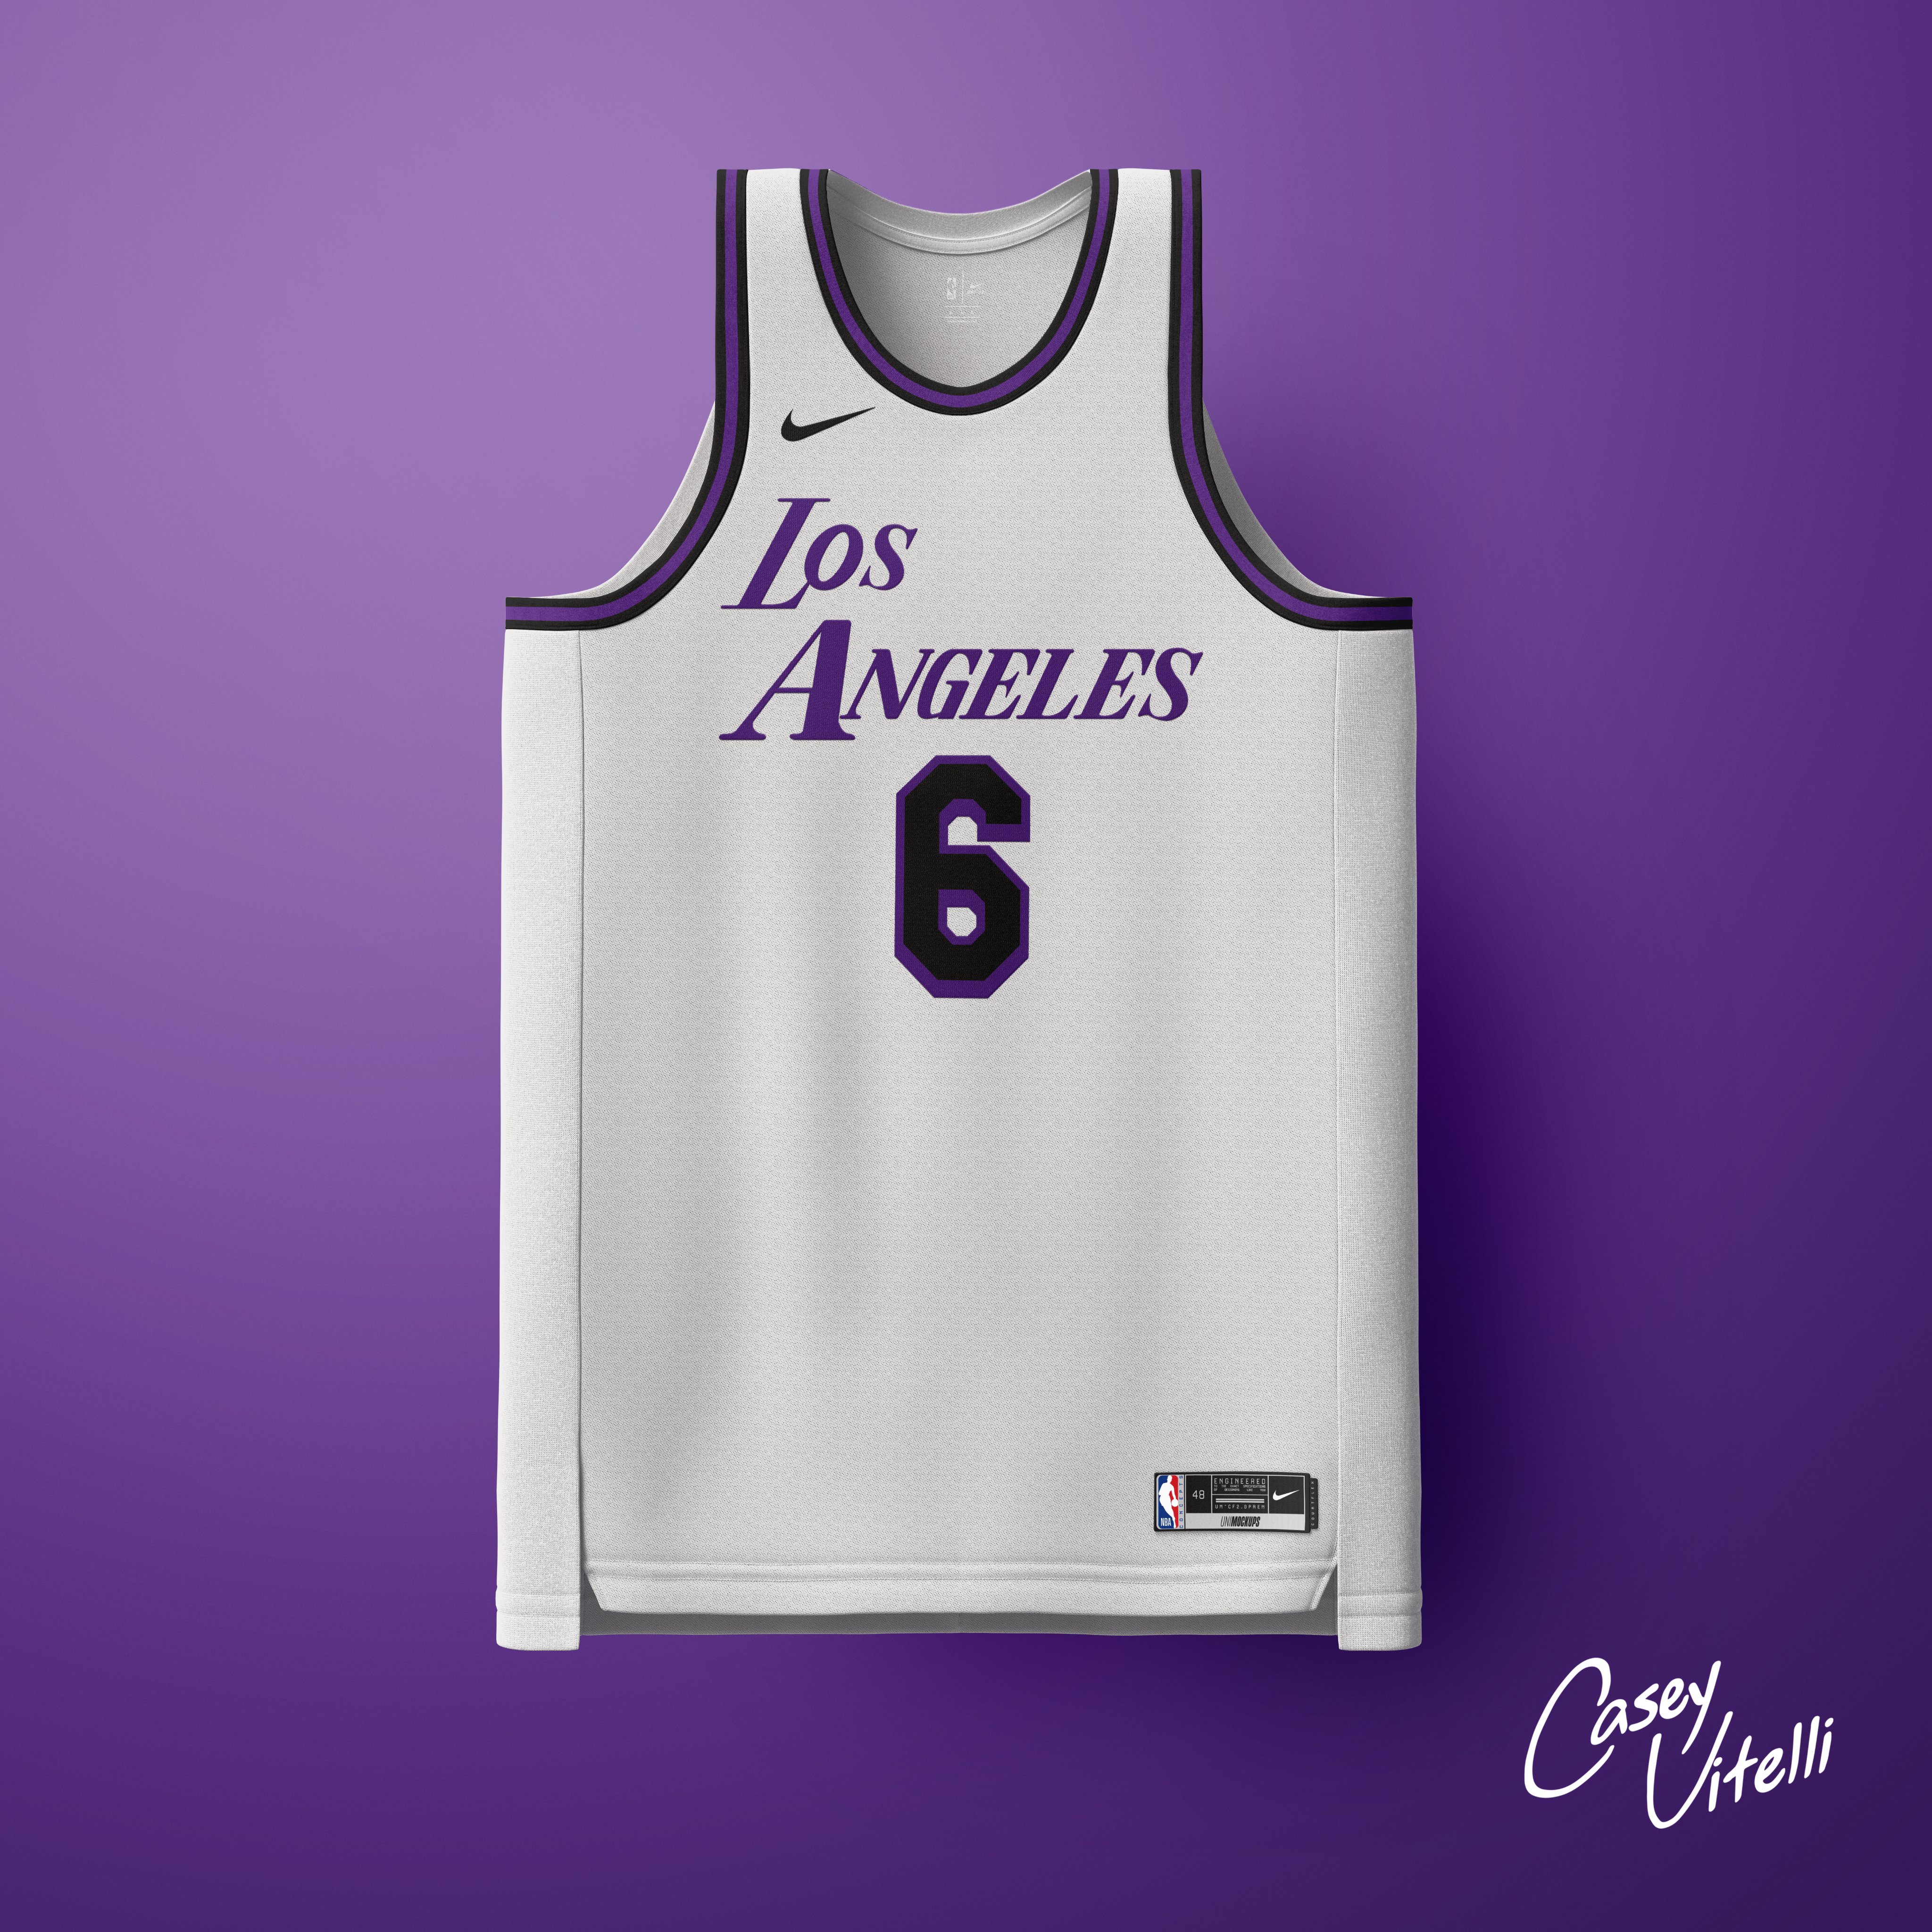 2023 lakers jersey